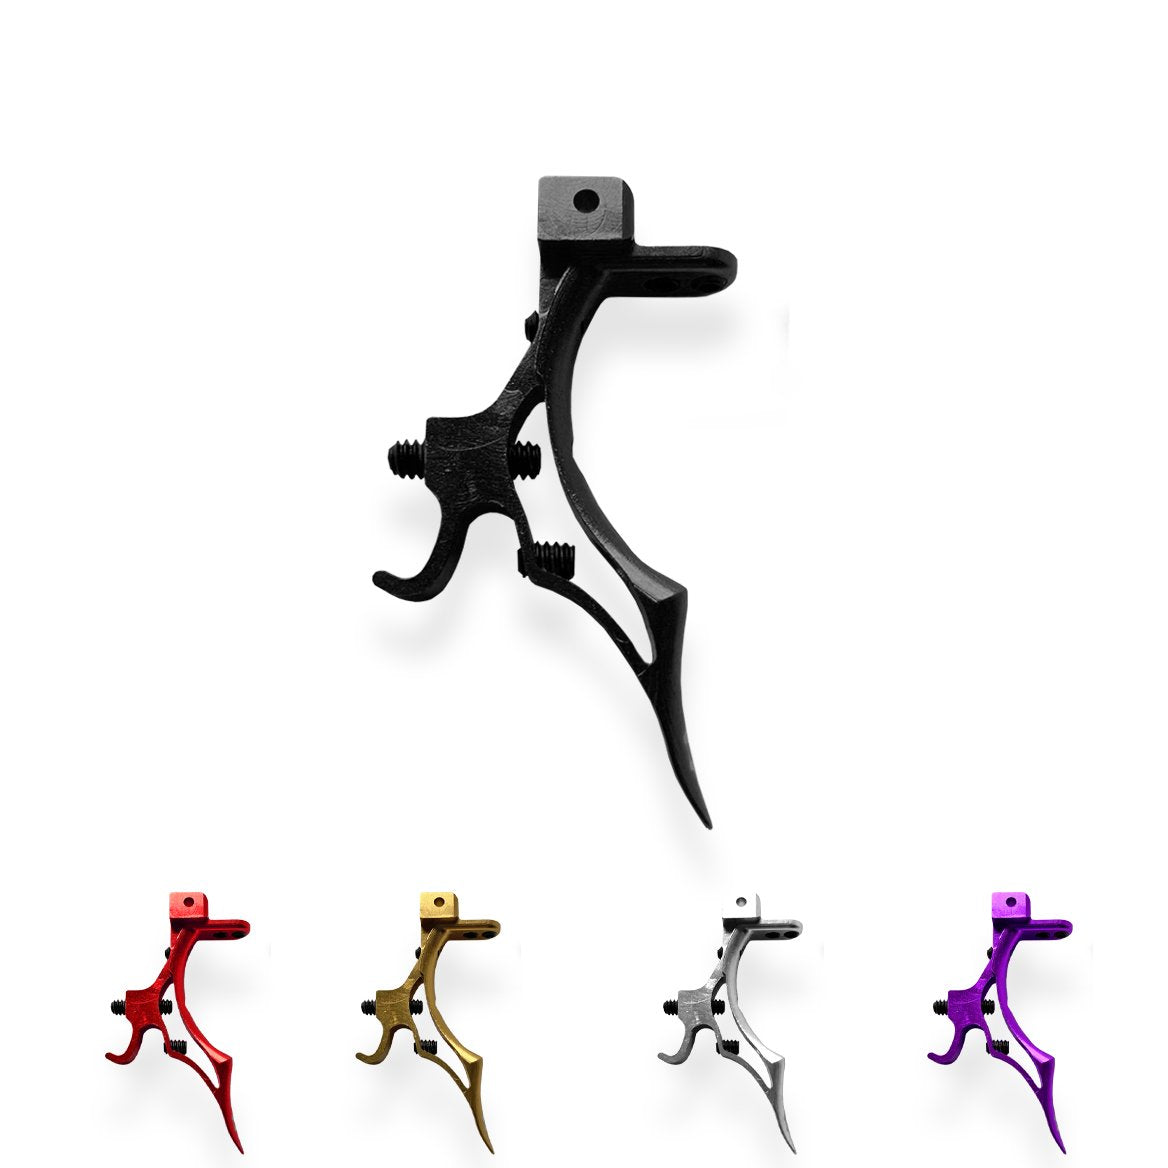 Infamous LV1 / GEO "Type S" Deuce Trigger (Fits LV1, LV1.6 LV1.1, LV1.5, LVR, GEO 3.5) - Eminent Paintball And Airsoft